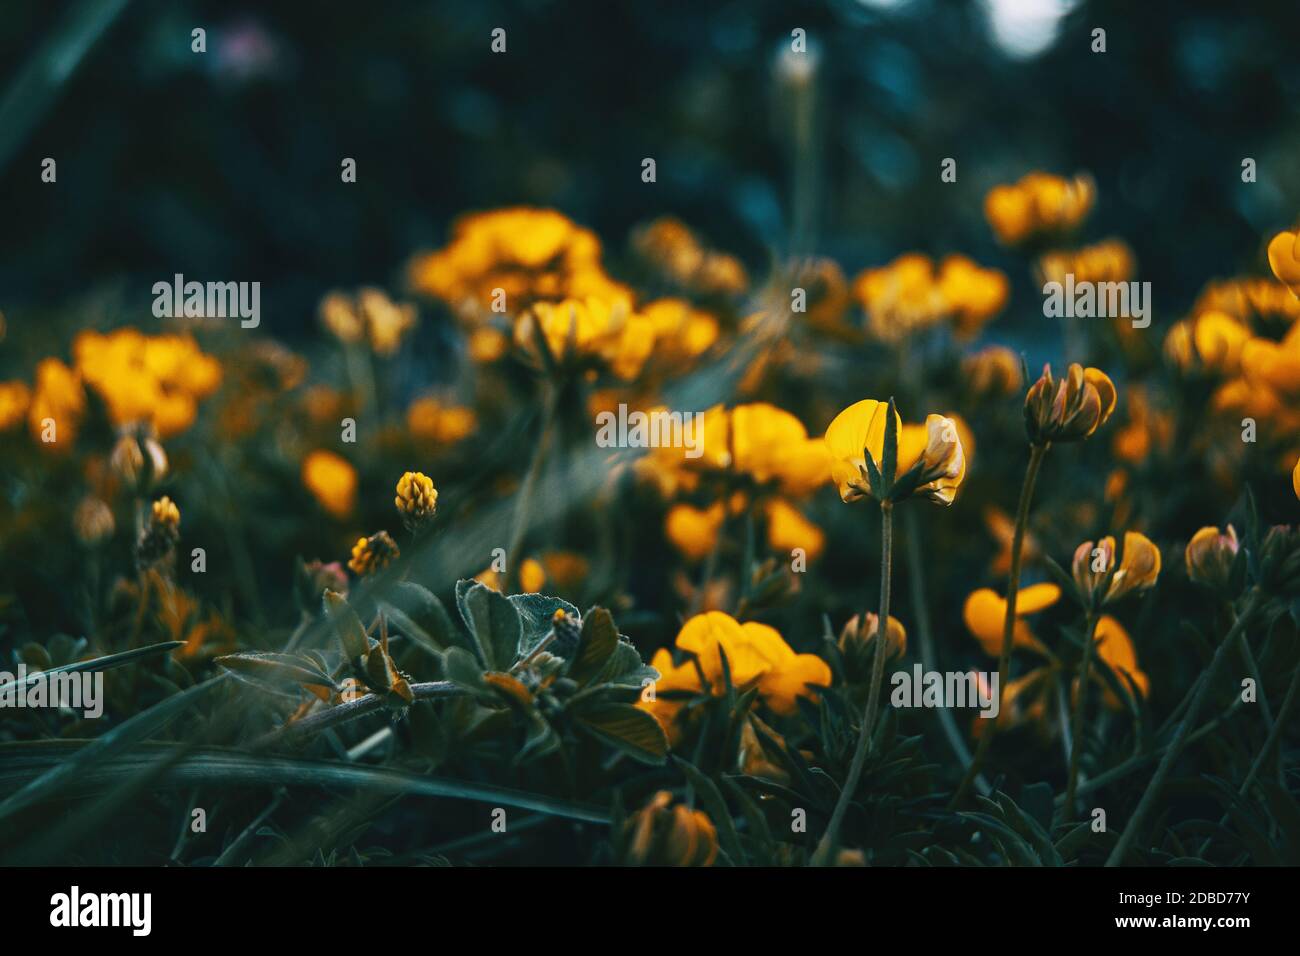 Close-up of some yellow flowers of medicago arborea growing in nature Stock Photo